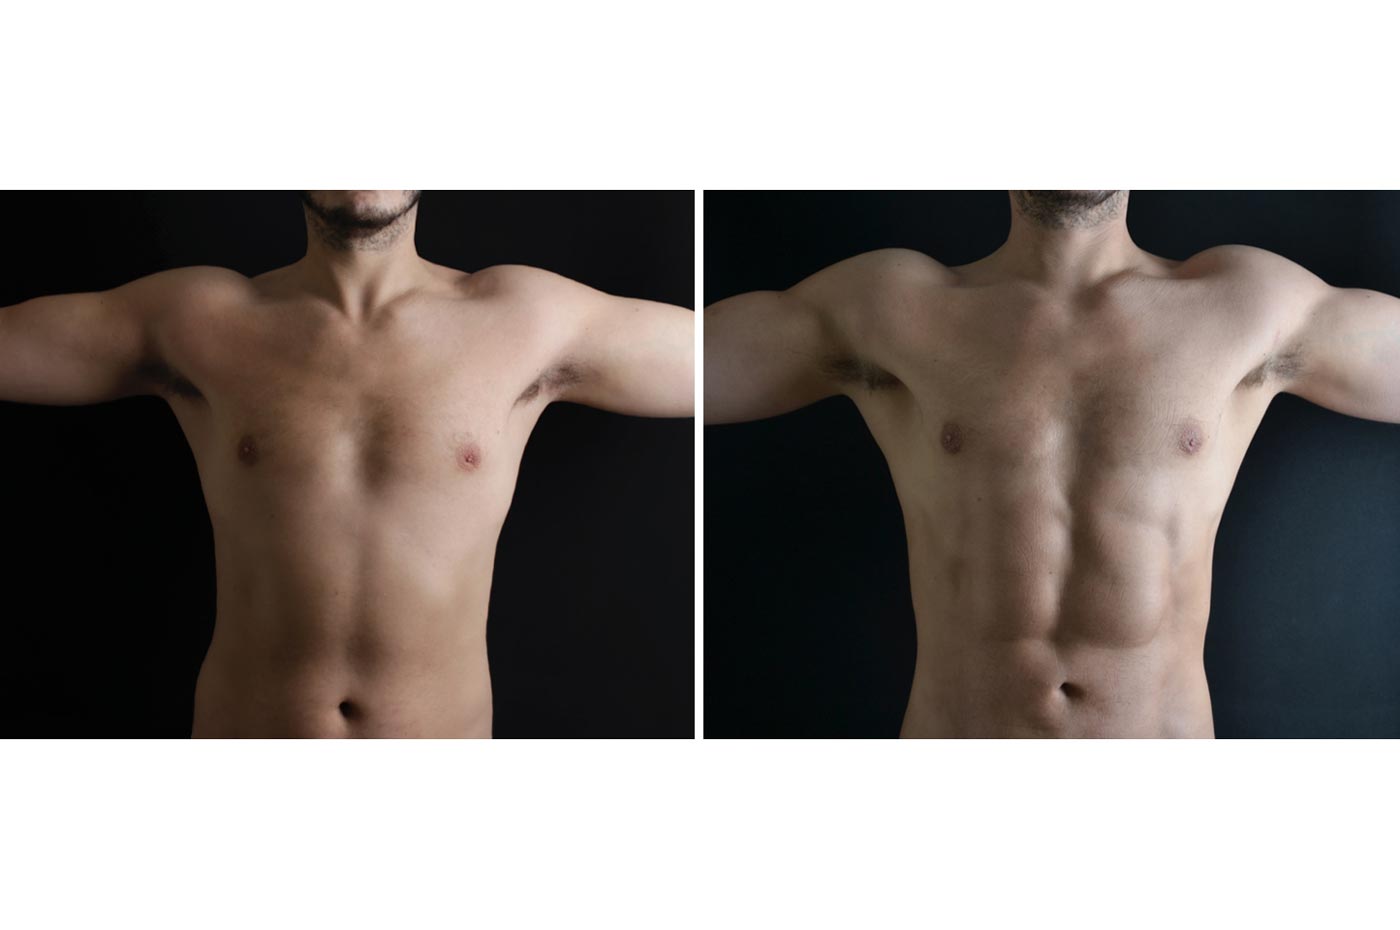 Male high definition liposuction before (left) and after (right), arms